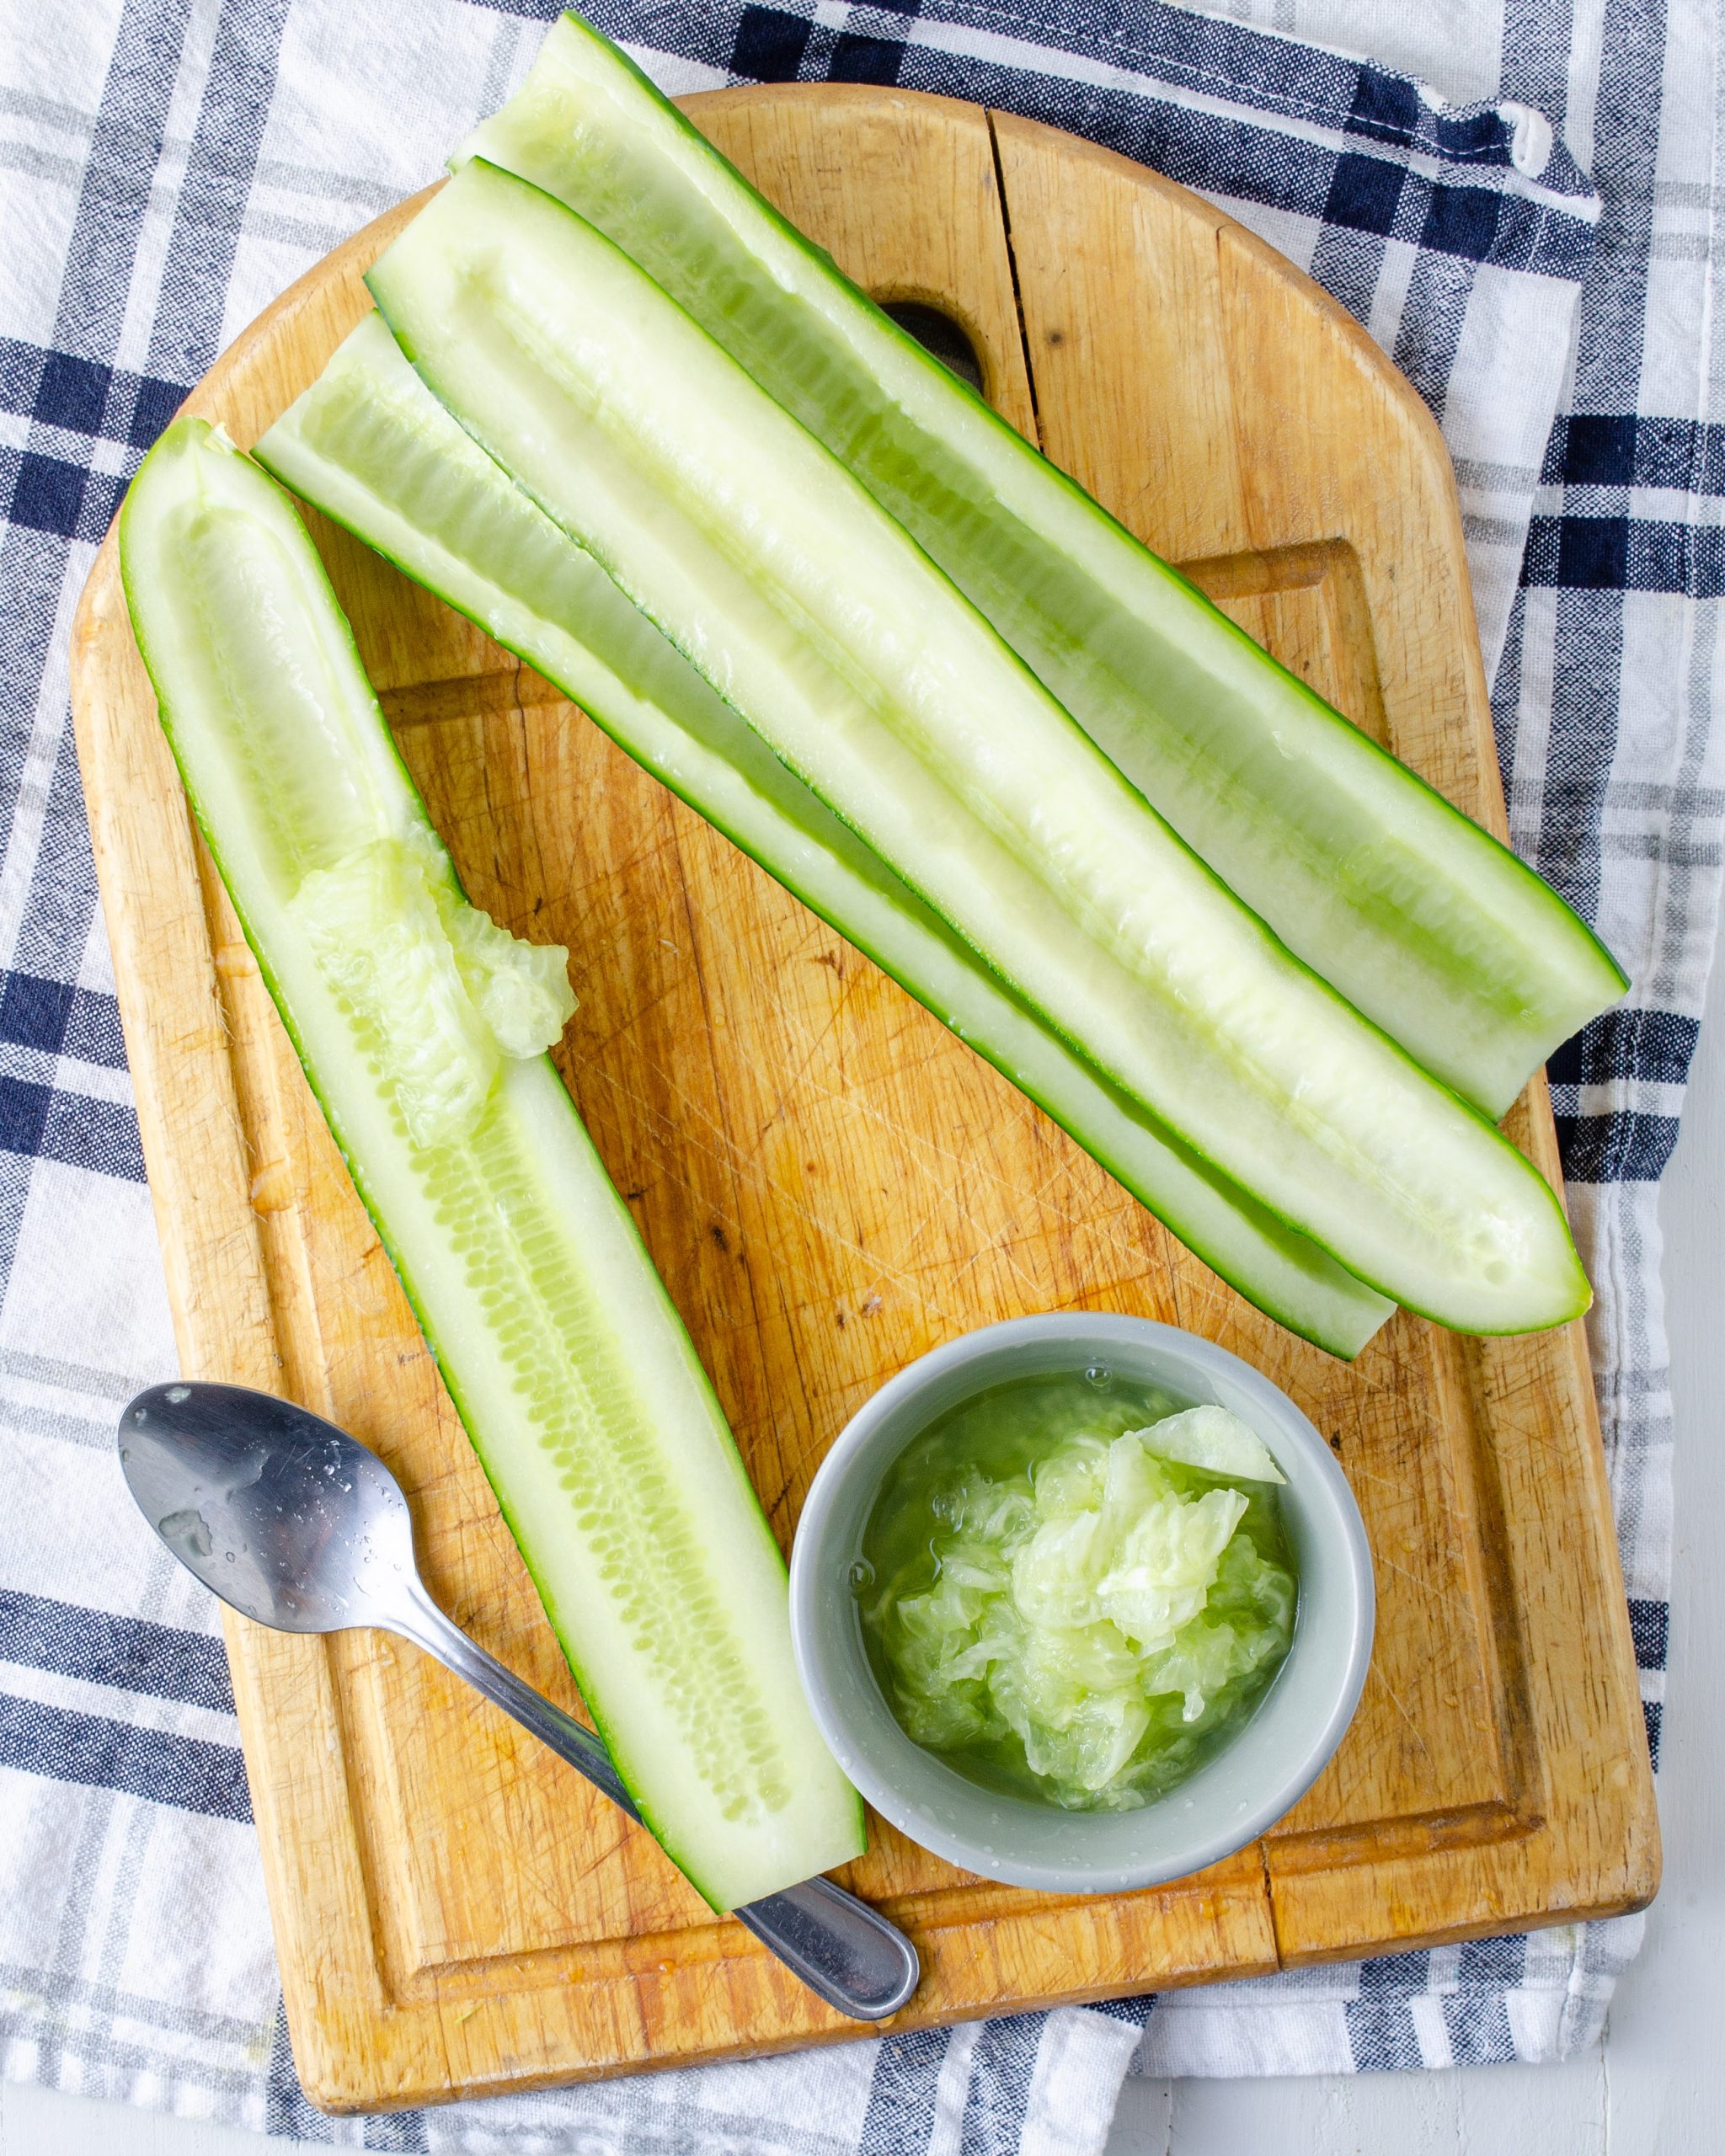 Cut the cucumbers in half lengthwise. Deseed the cucumbers.